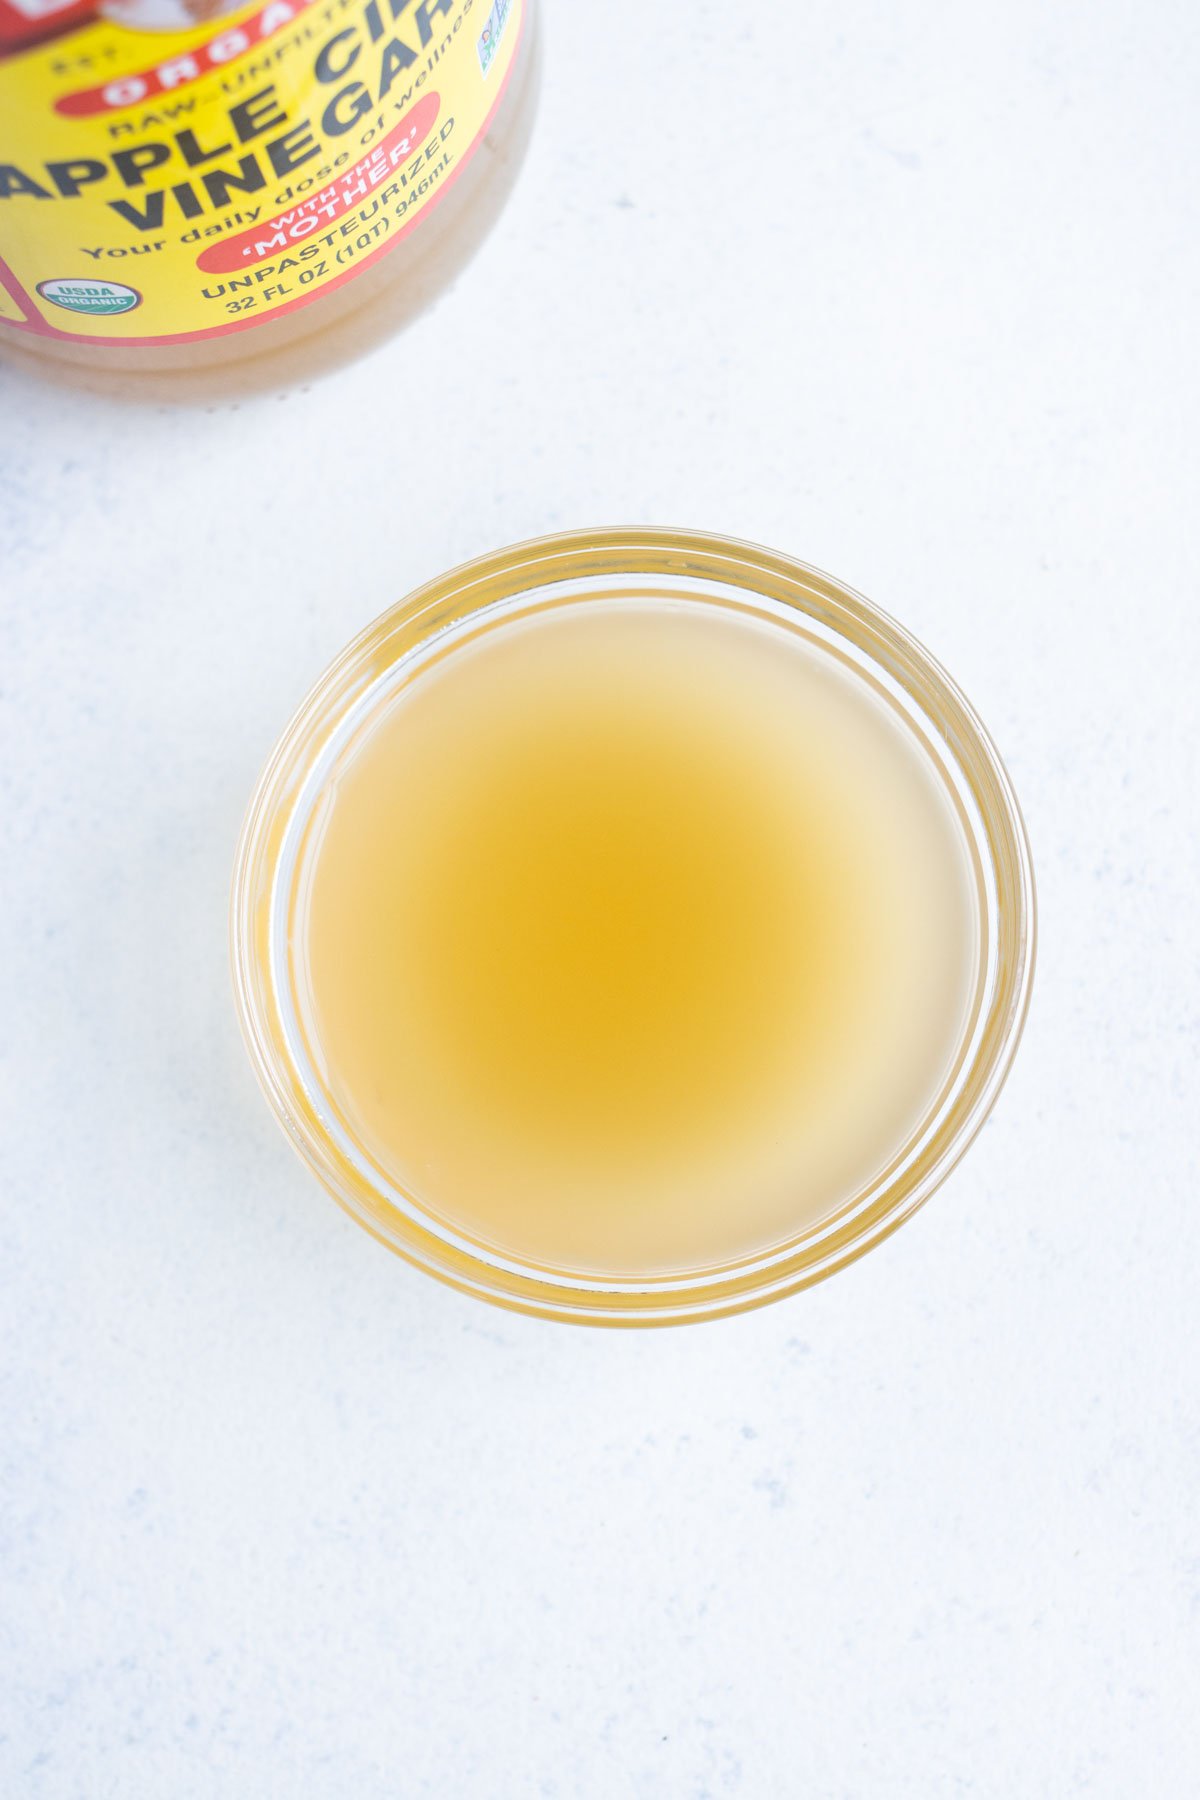 Bird's eye view of apple cider vinegar in a small glass bowl with the container in the background.